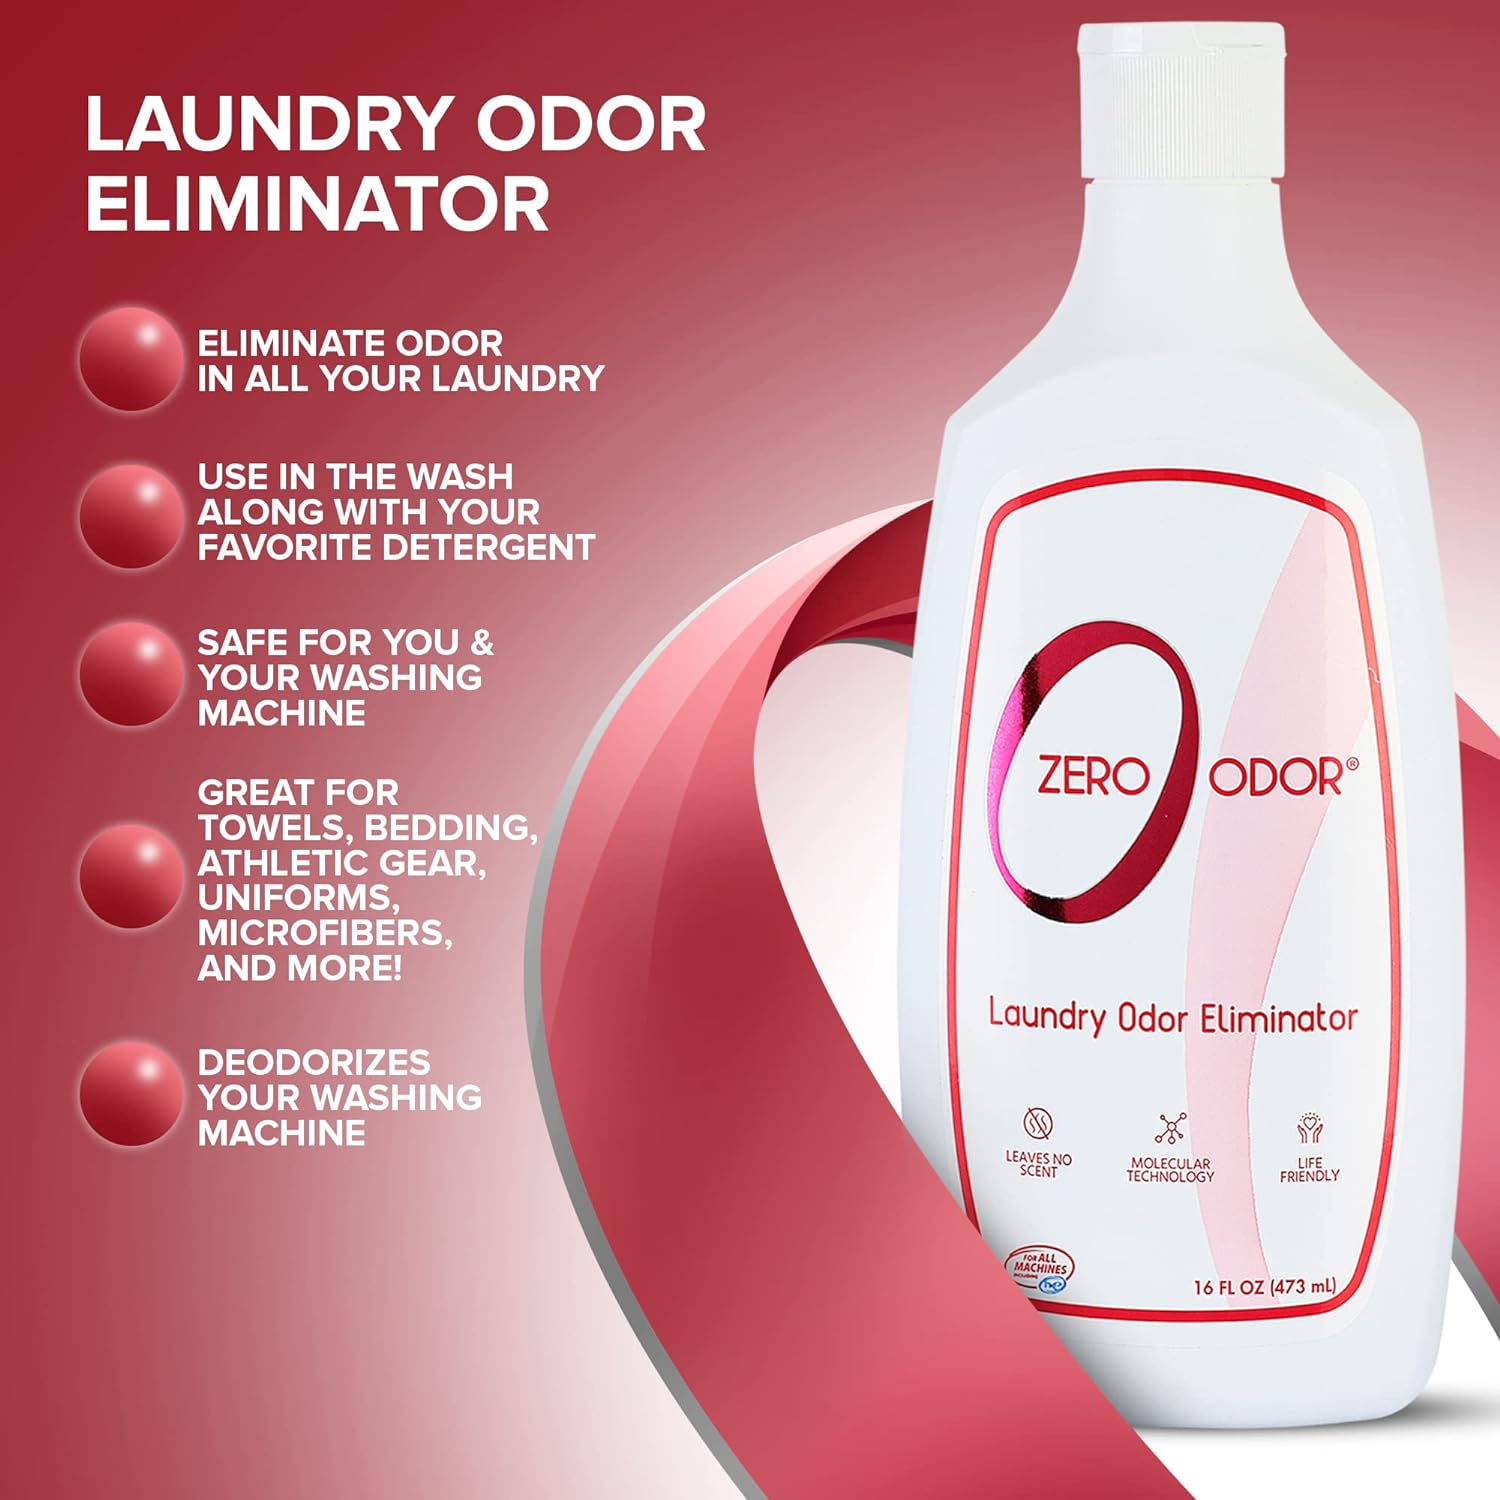 Zero Odor – Laundry Odor Eliminator - Permanently Eliminate laundry Odor – Patented Molecular Technology Best For Clothes, Towels & Linens, Shoes, Bags, Etc. - Smell Great Again, 16oz : Health & Household